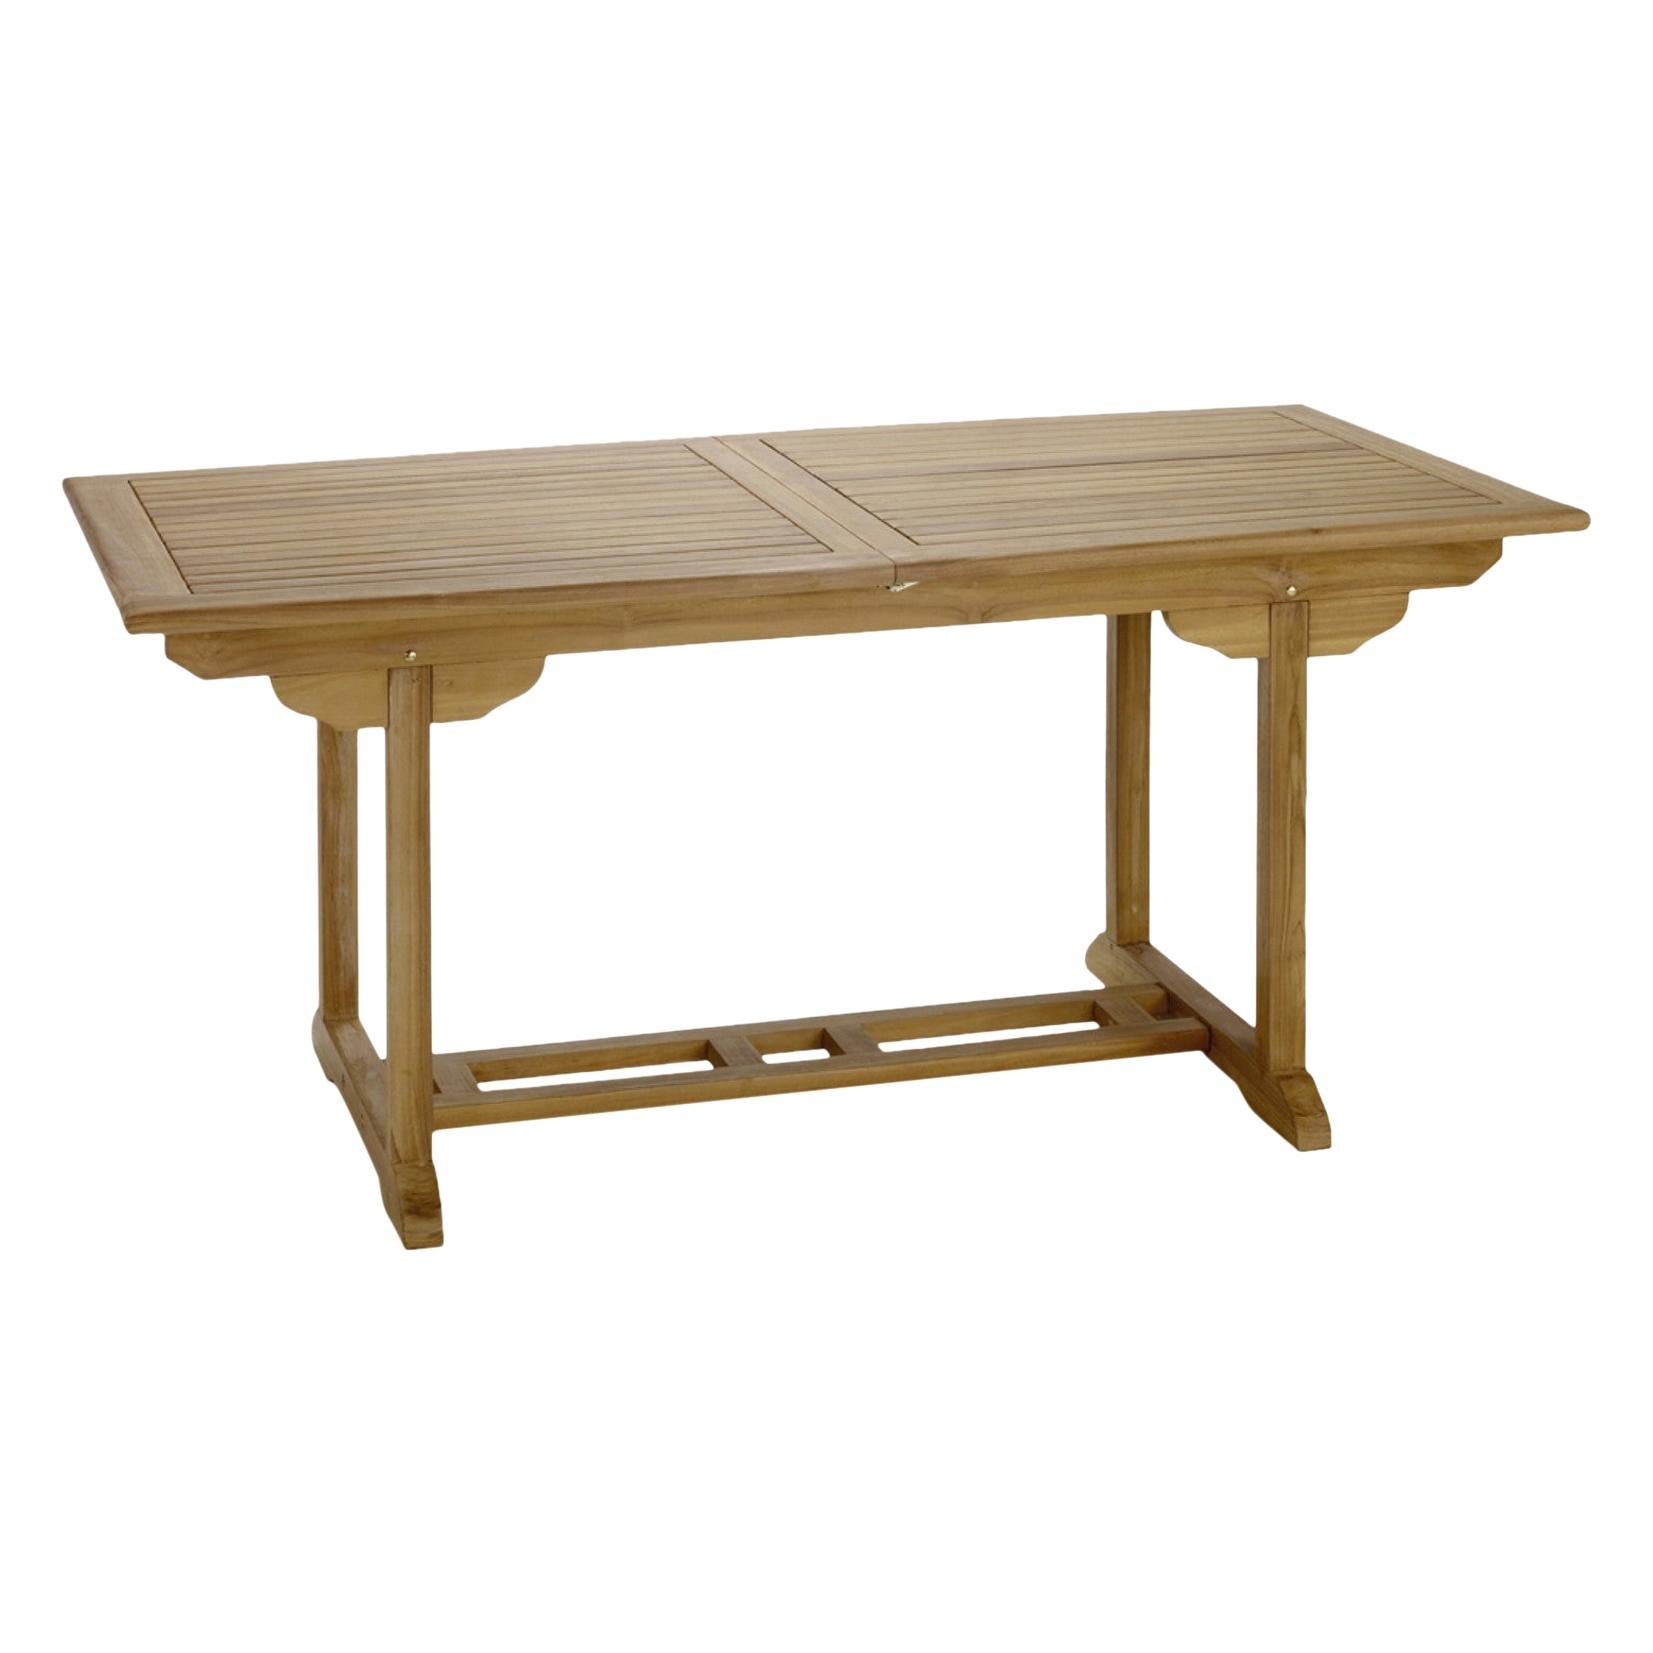 New Teak Rectangular Foldable Dining Table, Indoor and Outdoor